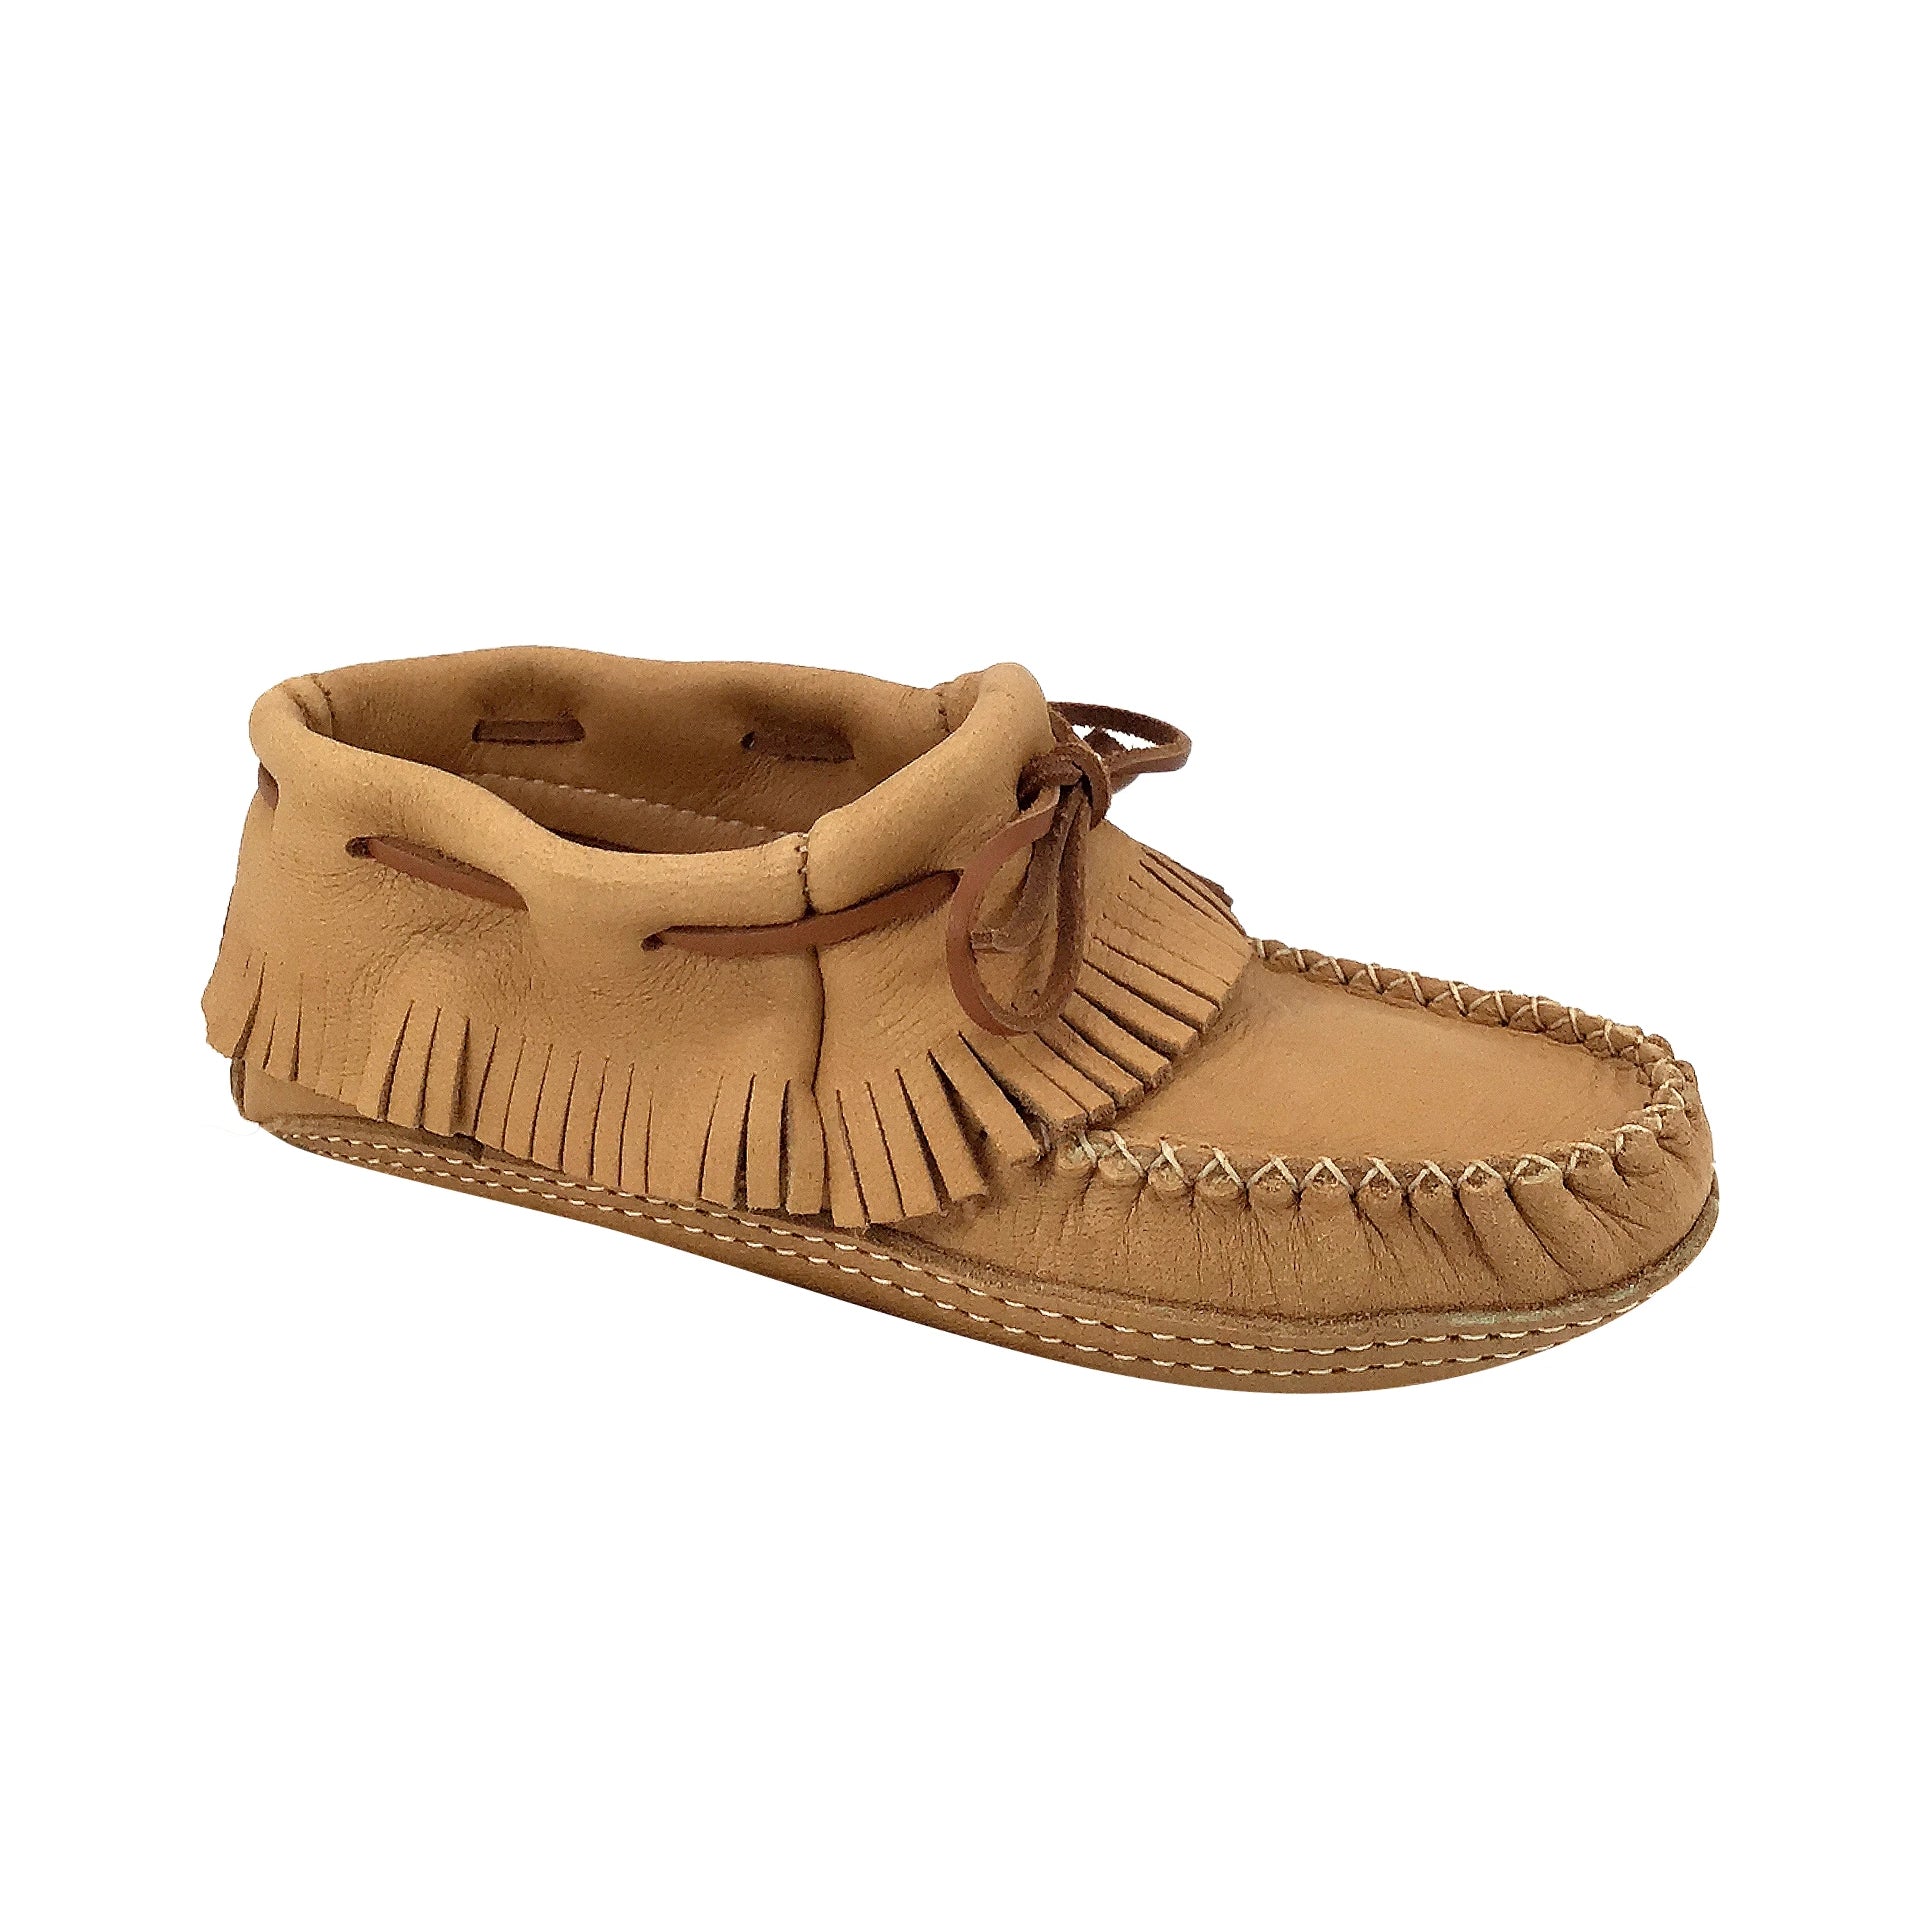 Women's Earthing Fringed Moccasins with Natural Non-Insulated Soles